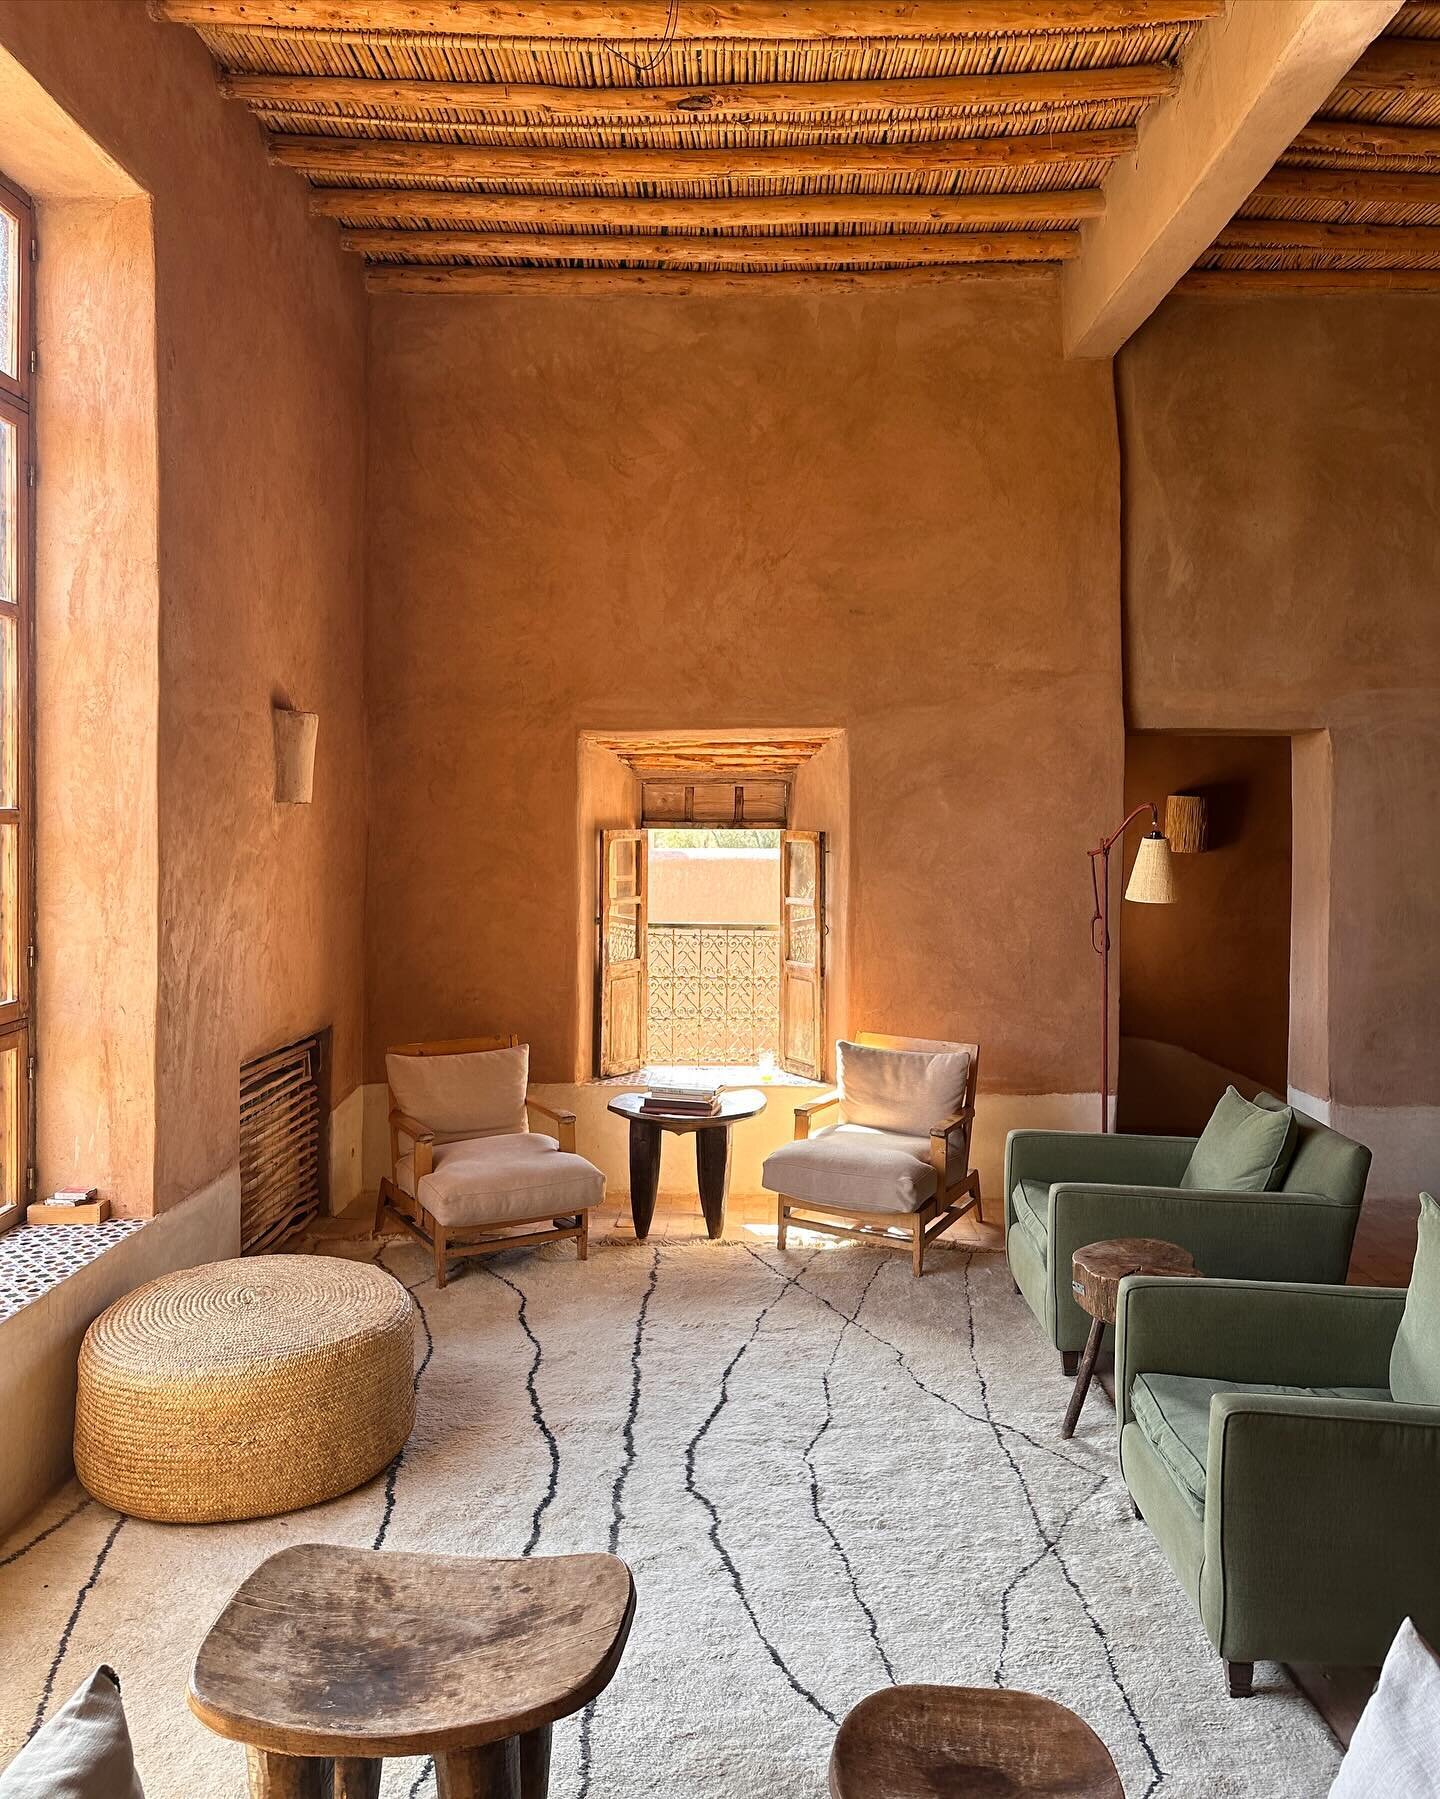 An incredible shopping and inspiration trip to Marrakech with the HoK Design Team! We explored some of the city&rsquo;s finest boutique spots, including a few favourites like @berberlodge_ , @bemarrakech and @riadbrummell
Which boutique spot in Marra